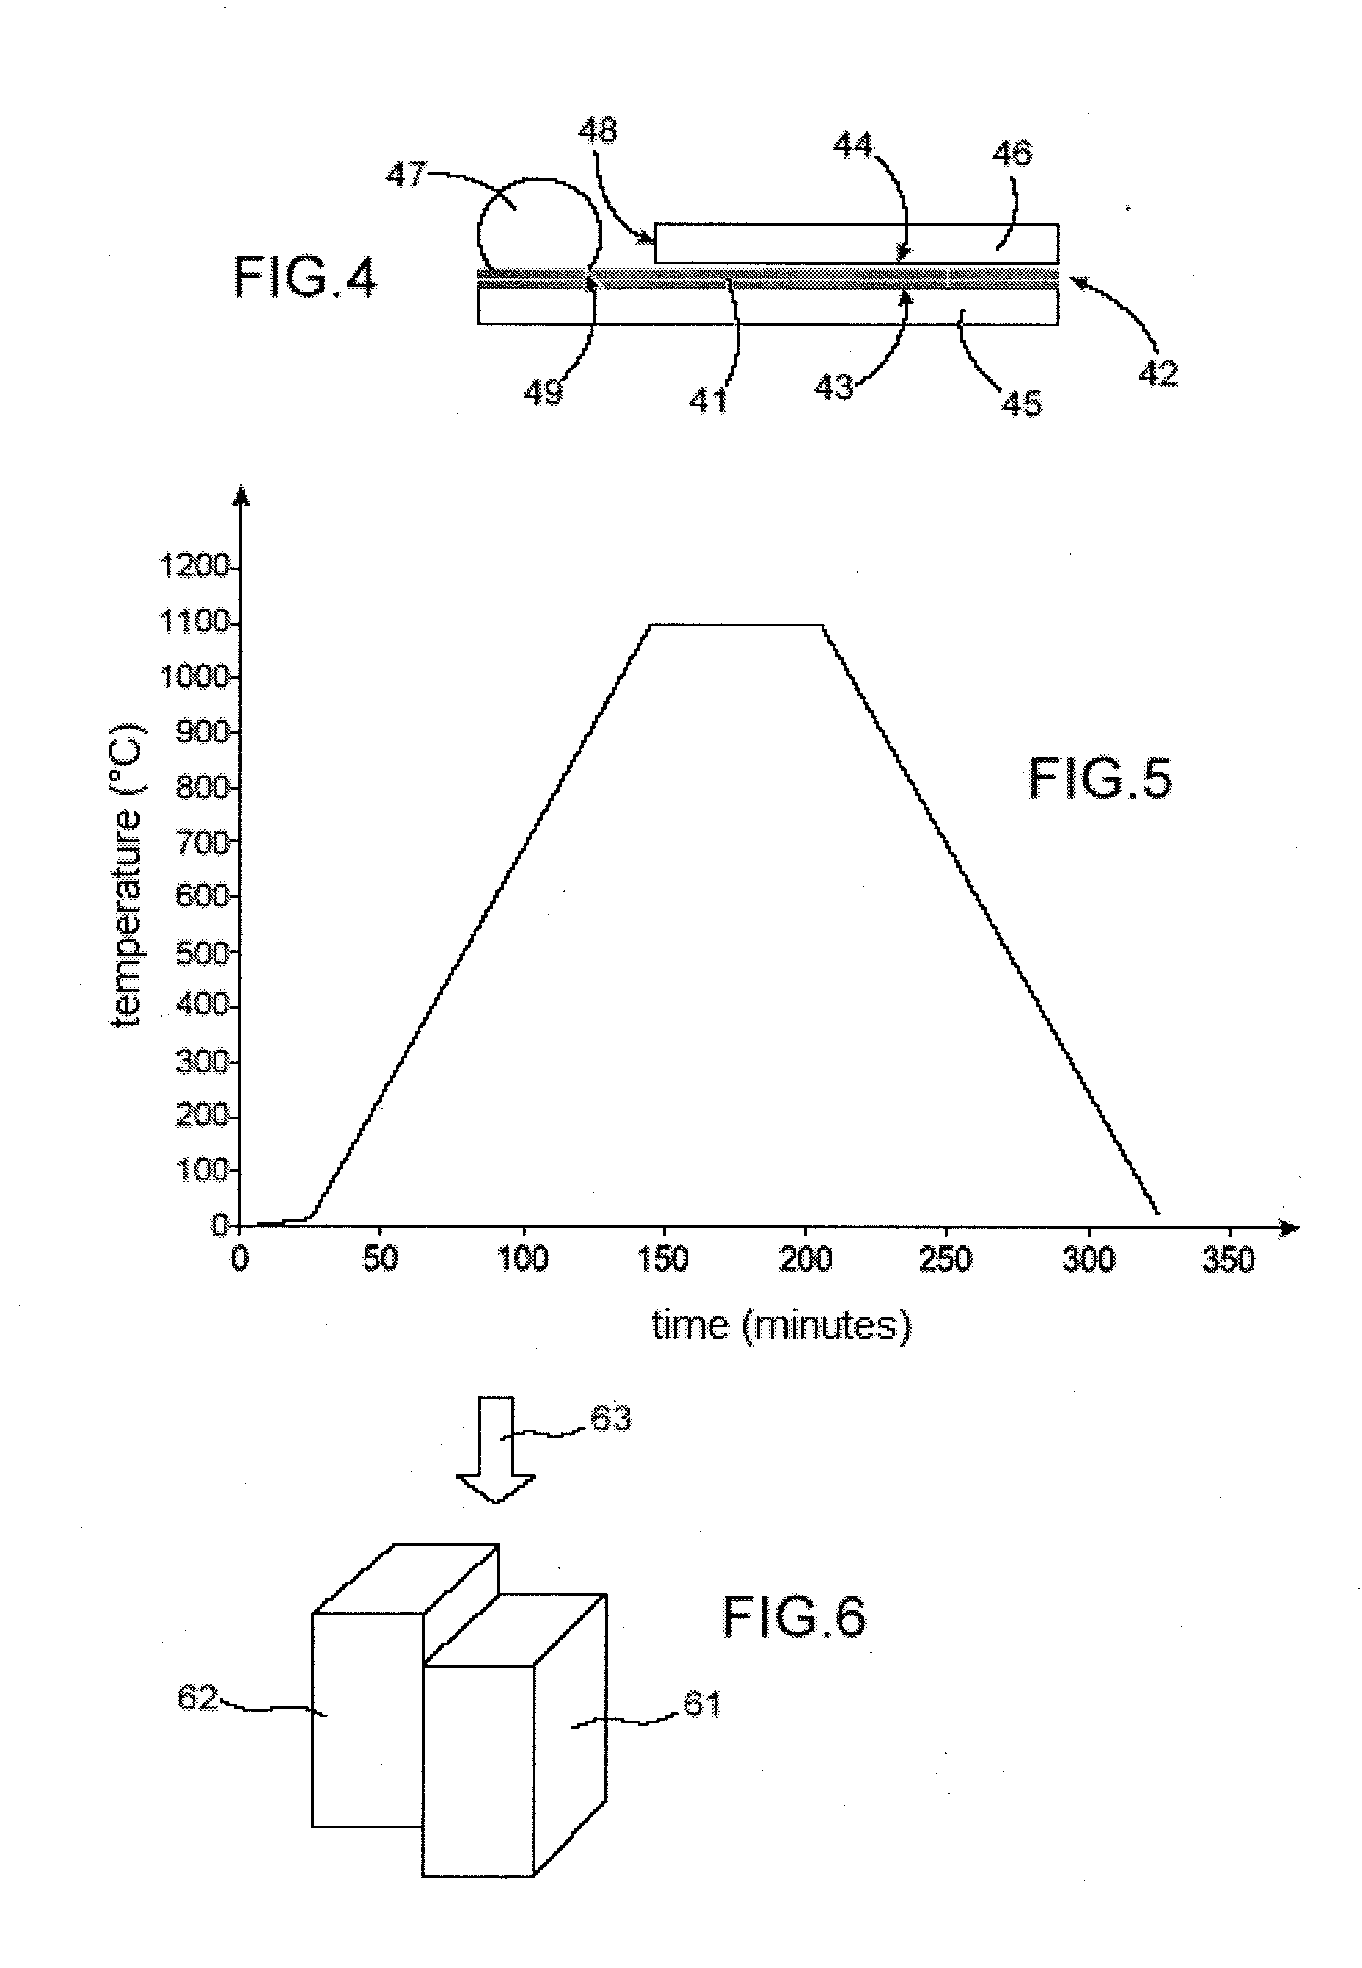 METHOD OF JOINING PARTS MADE OF SiC-BASED MATERIALS BY NON-REACTIVE BRAZING WITH ADDITION OF A REINFORCEMENT. BRAZING COMPOSITIONS AND JOINT AND ASSEMBLY THAT ARE OBTAINED BY SUCH A METHOD